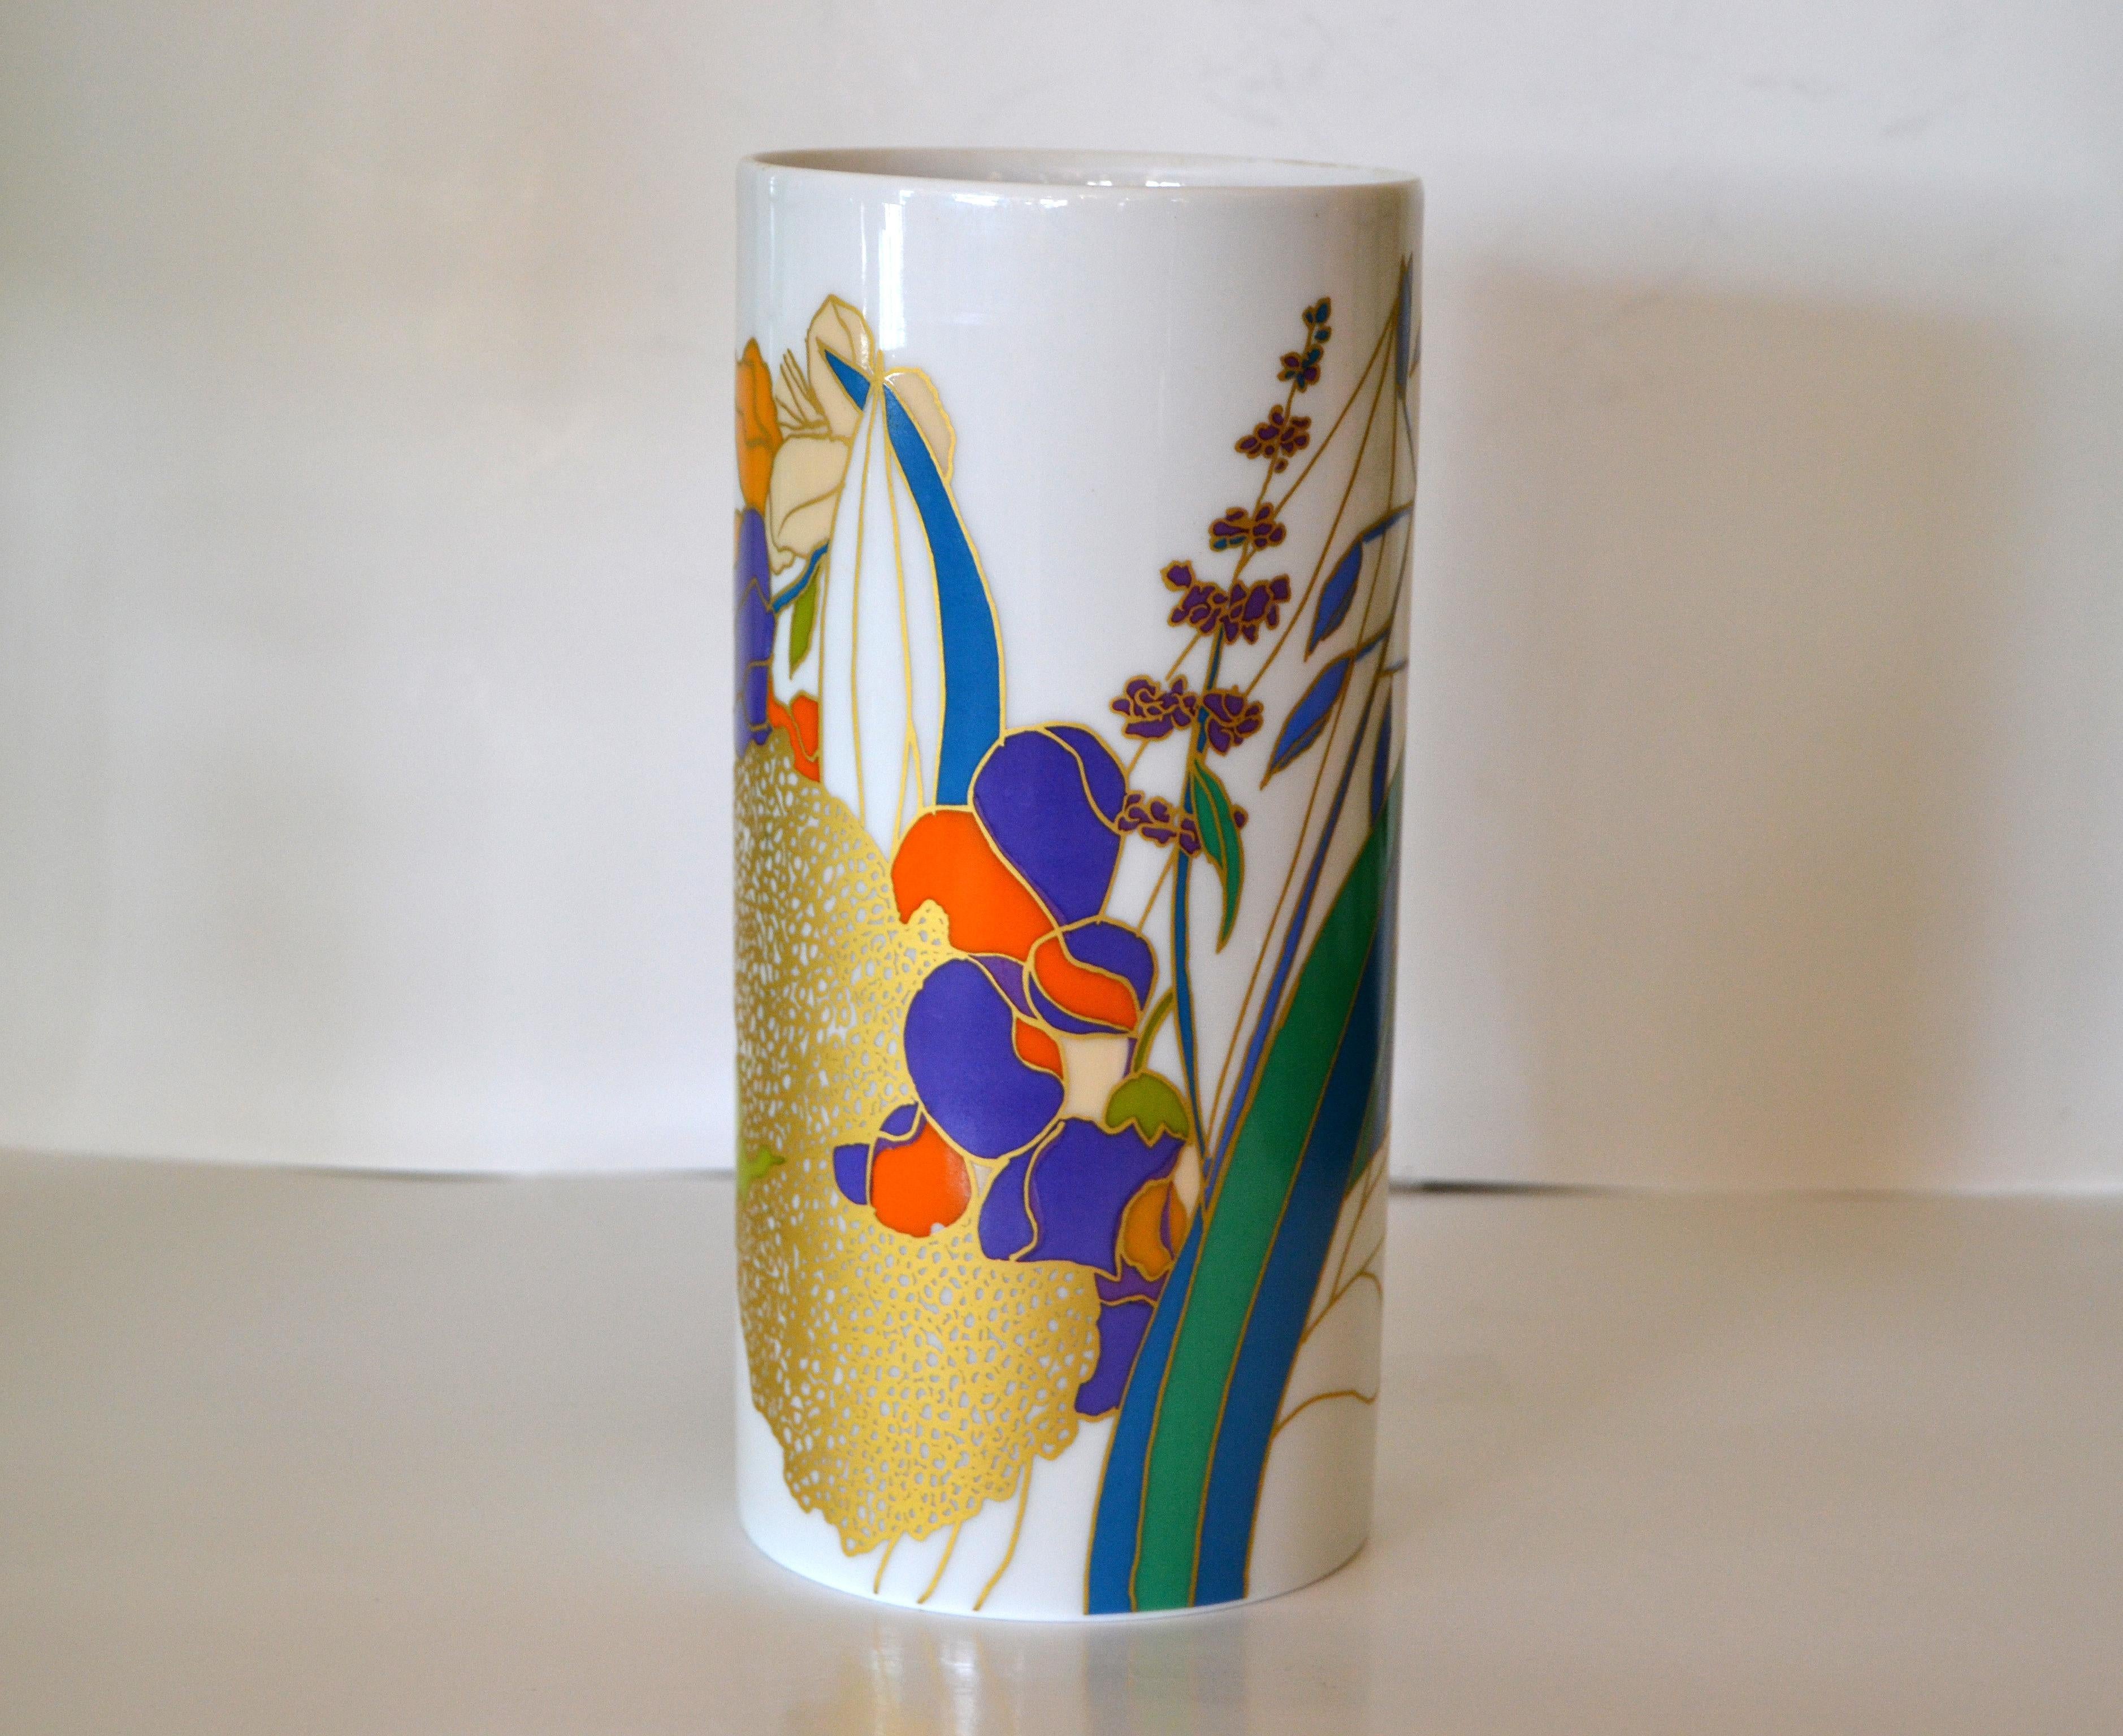 Striking original Rosenthal porcelain hand painted flower vase designed by Wolfgang Bauer and made in Germany for Studio-Linie.
The vase features multi-color floral branch outlined in gold.
Signed with the artist's signature 